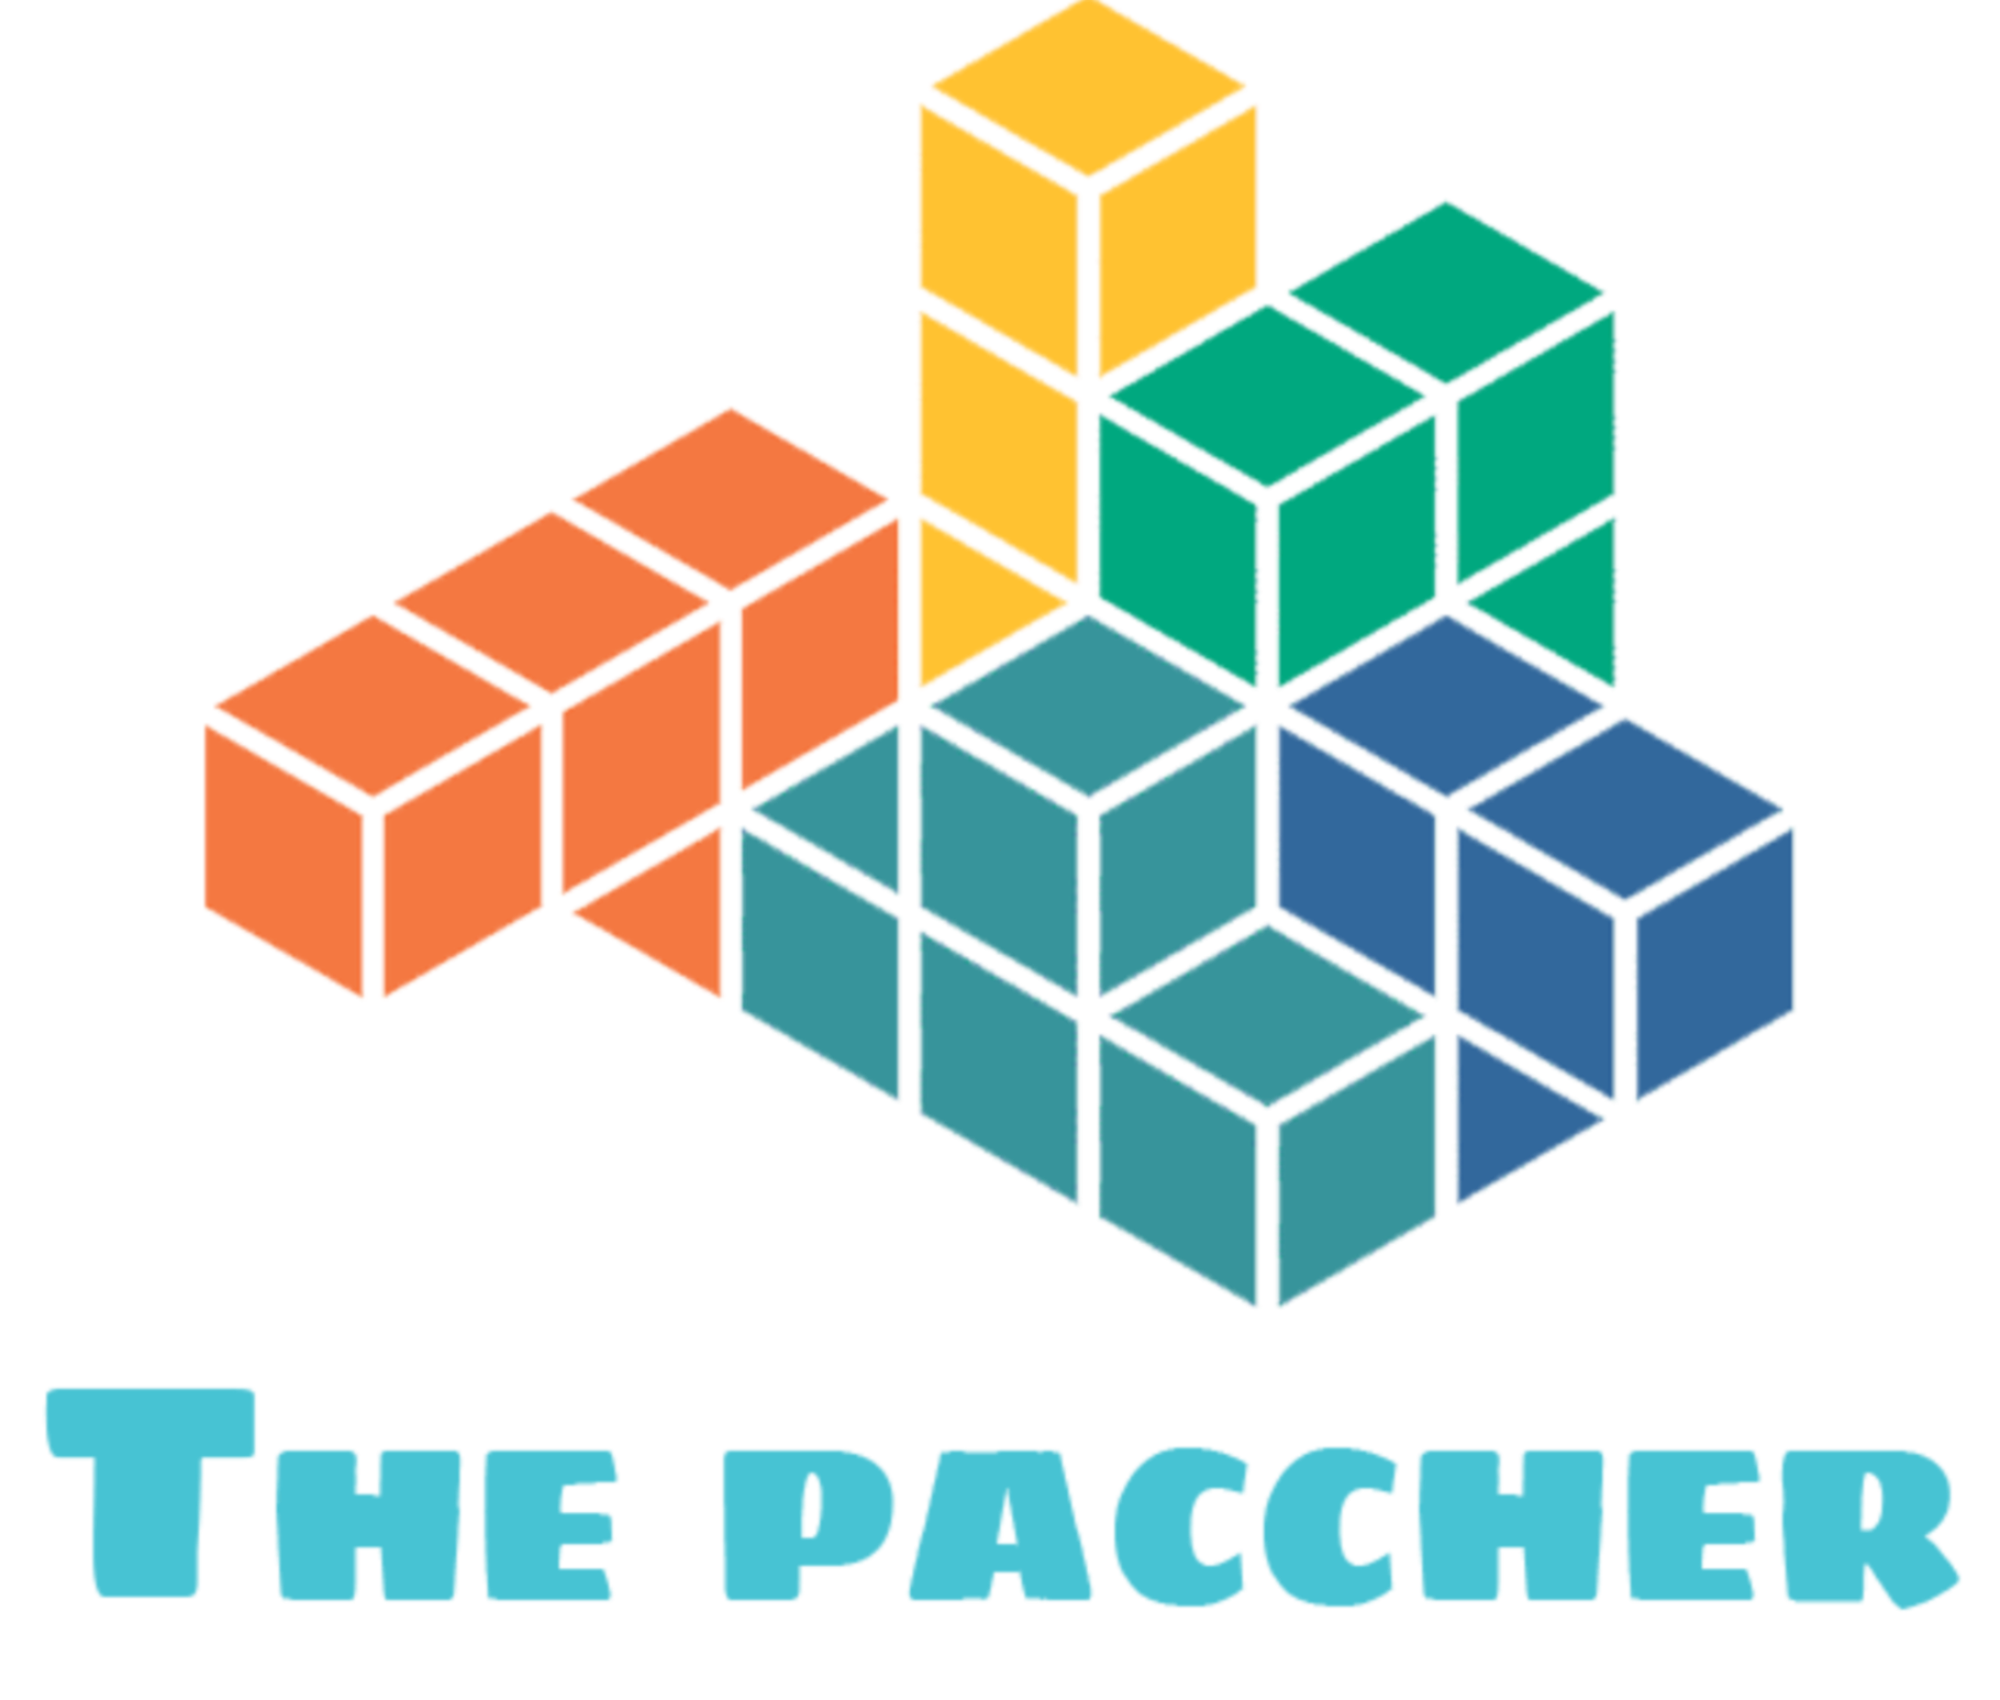 The paccher